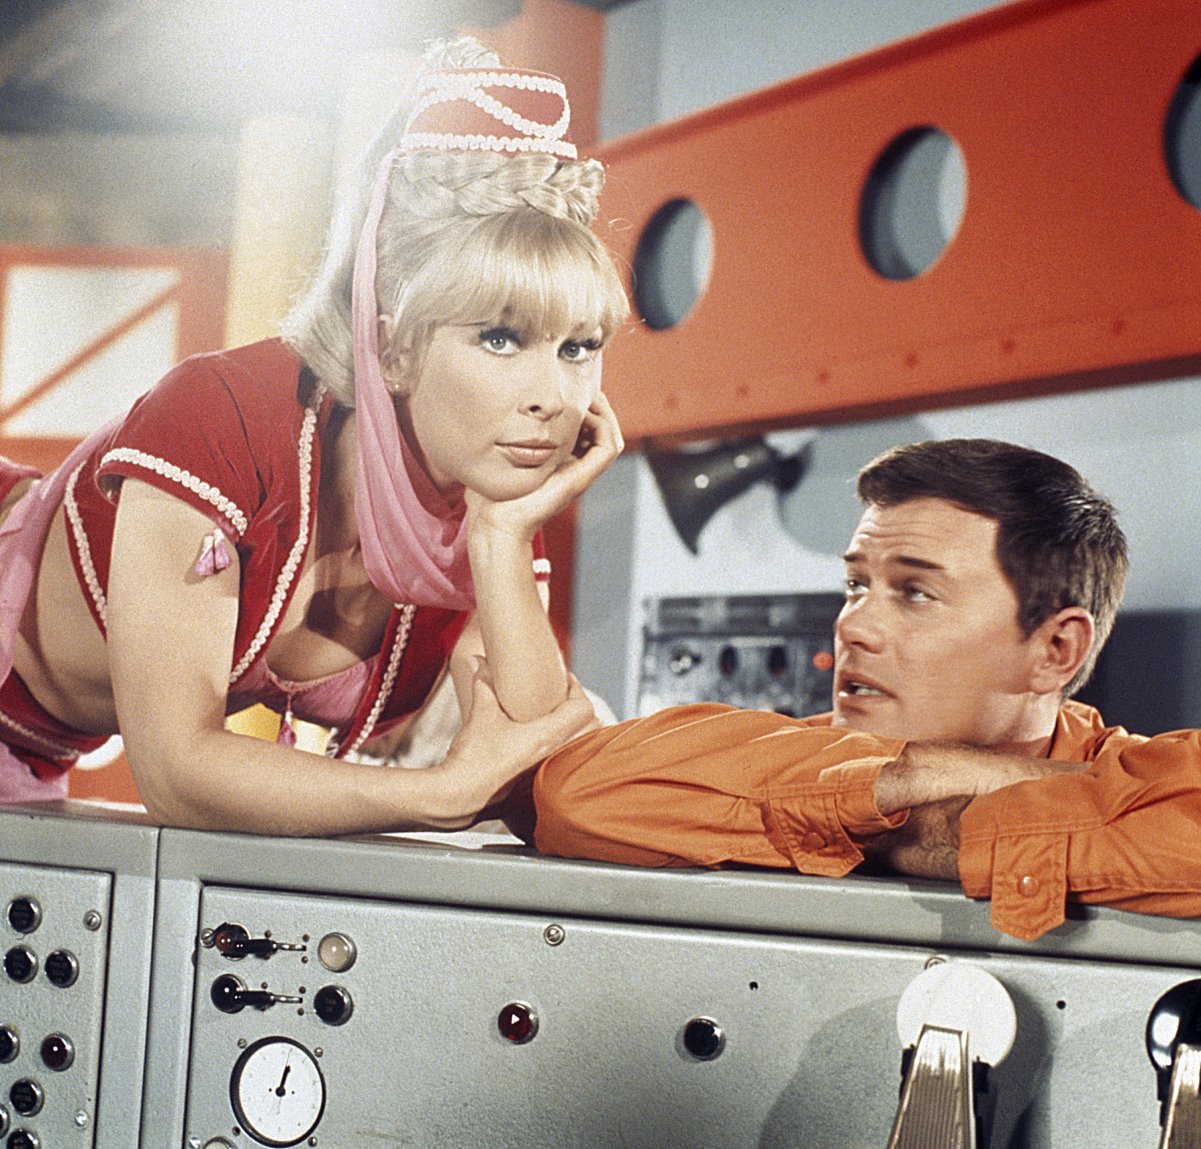 Pictures Of I Dream Of Jeannie best images